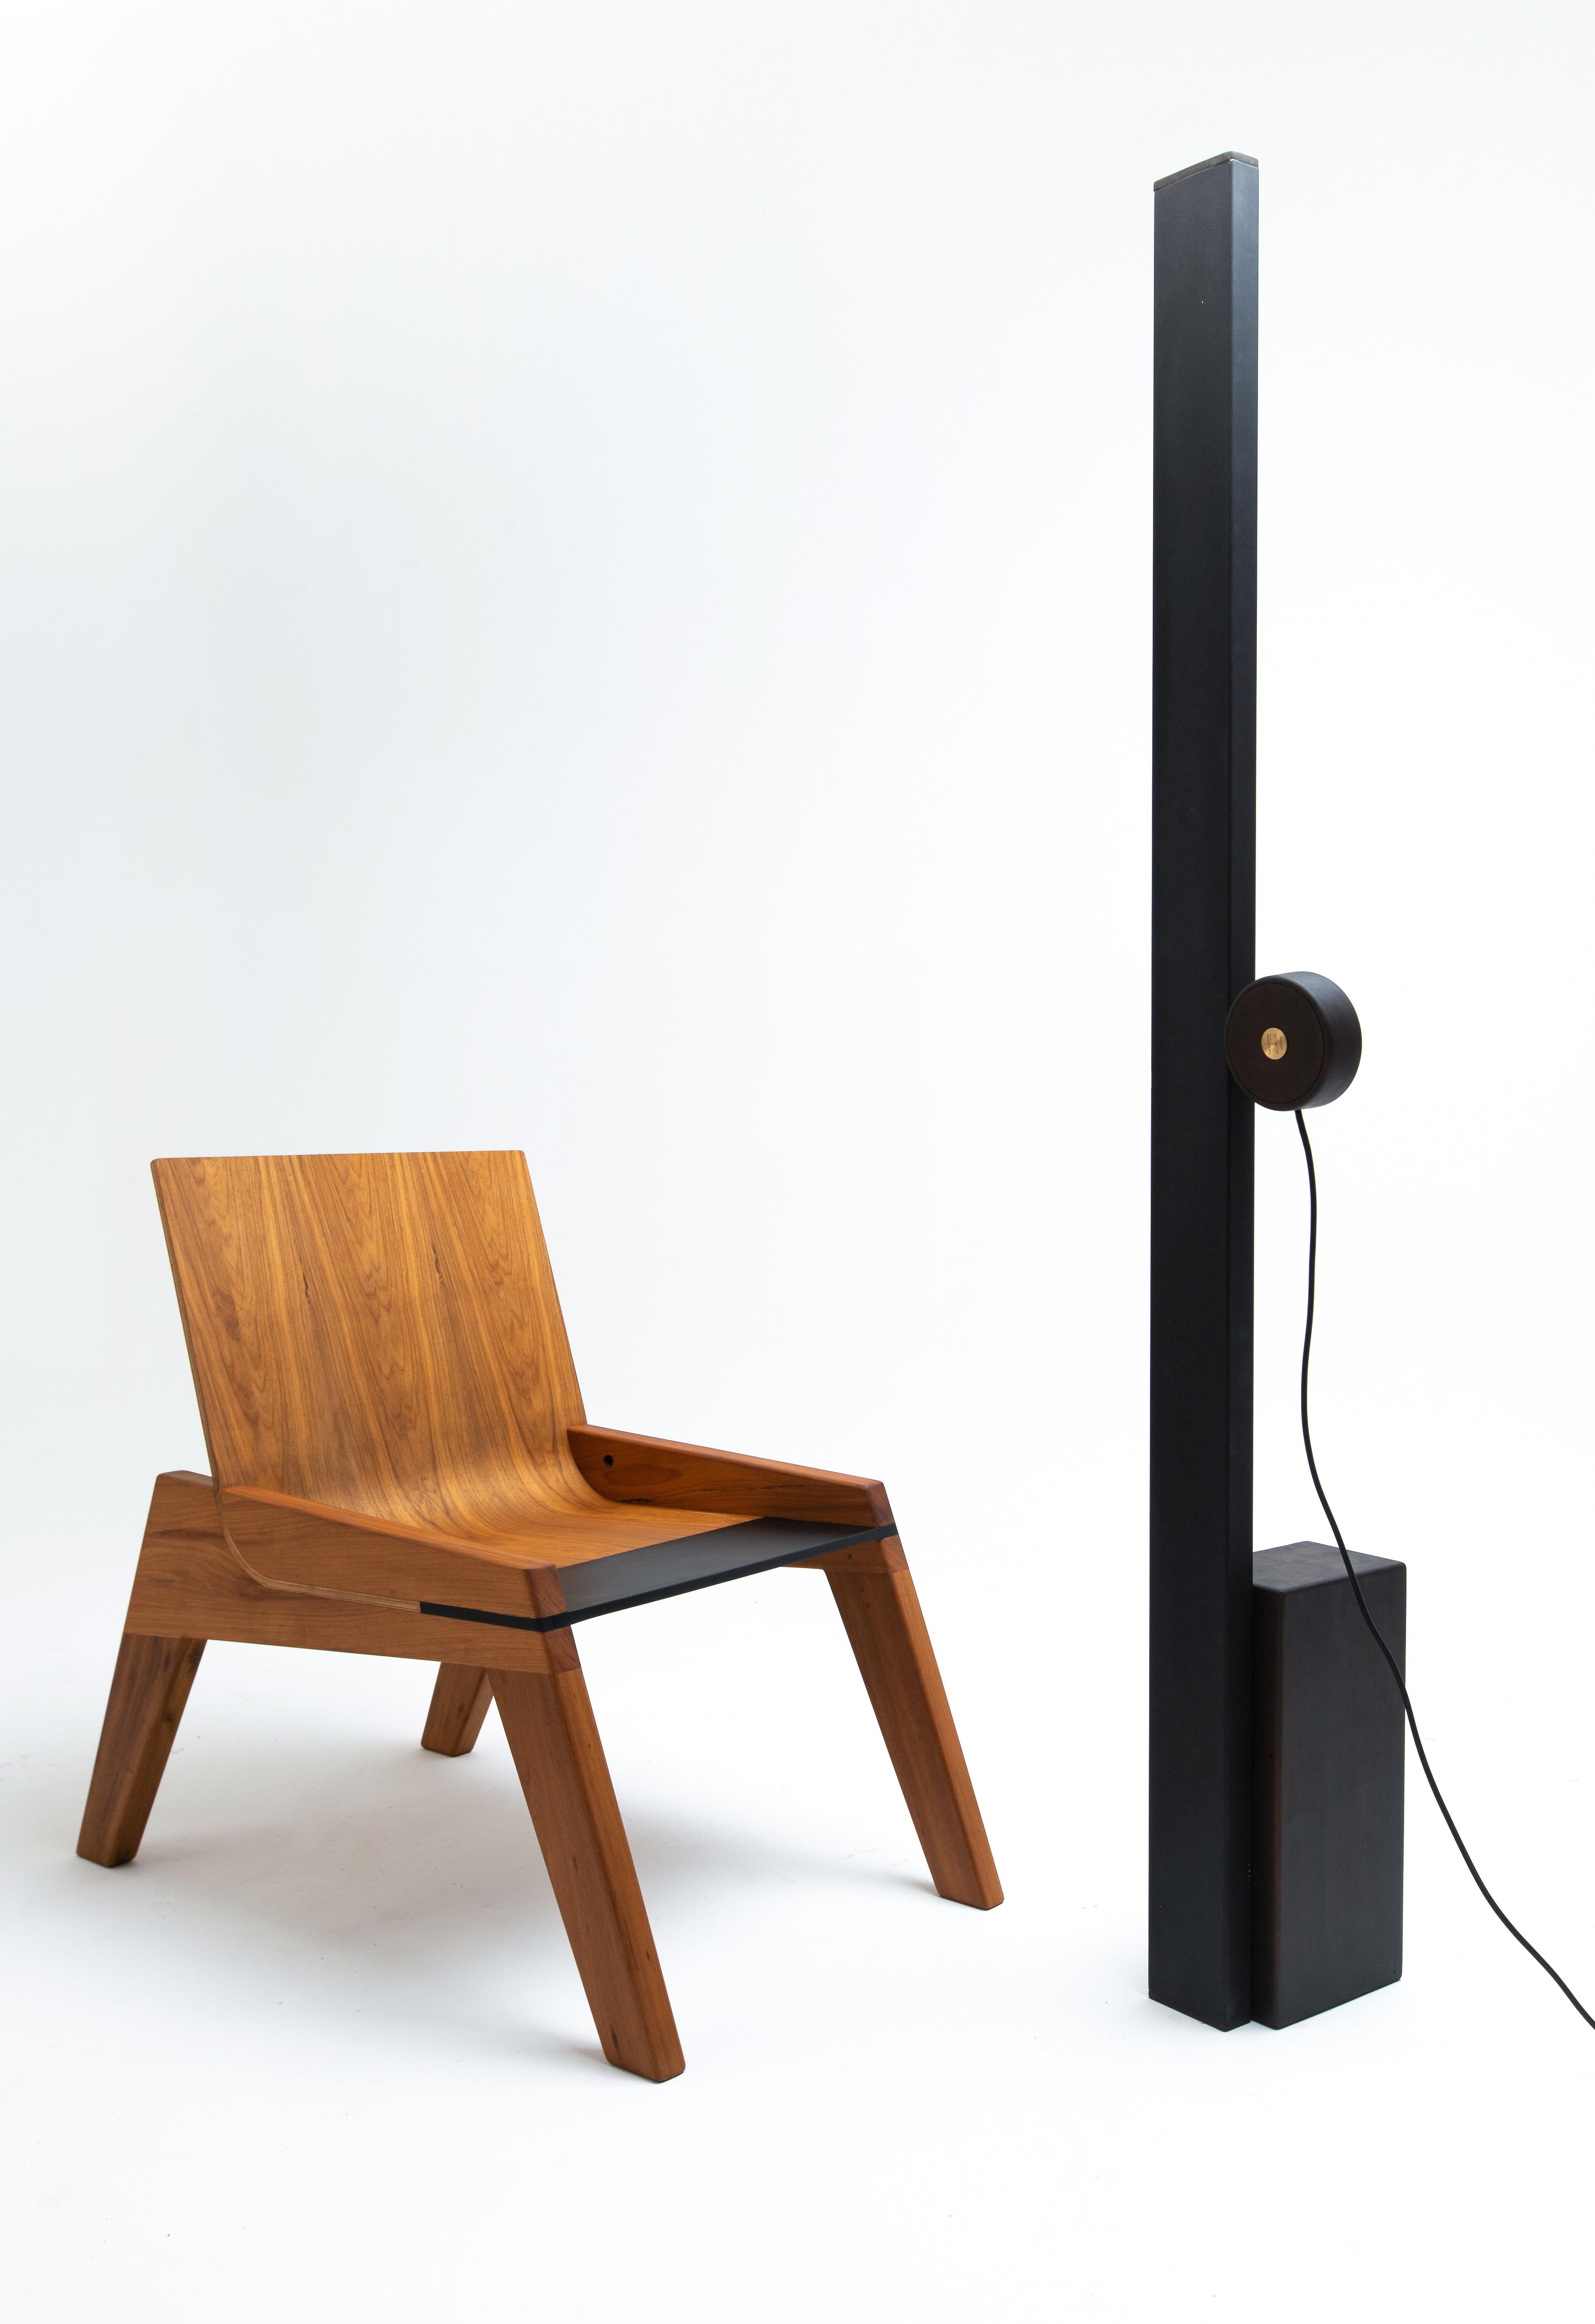 Hardwood Minimalist Brazilian Handcrafted Lounge Chair ''an Life'' by Dimitrih Correa For Sale